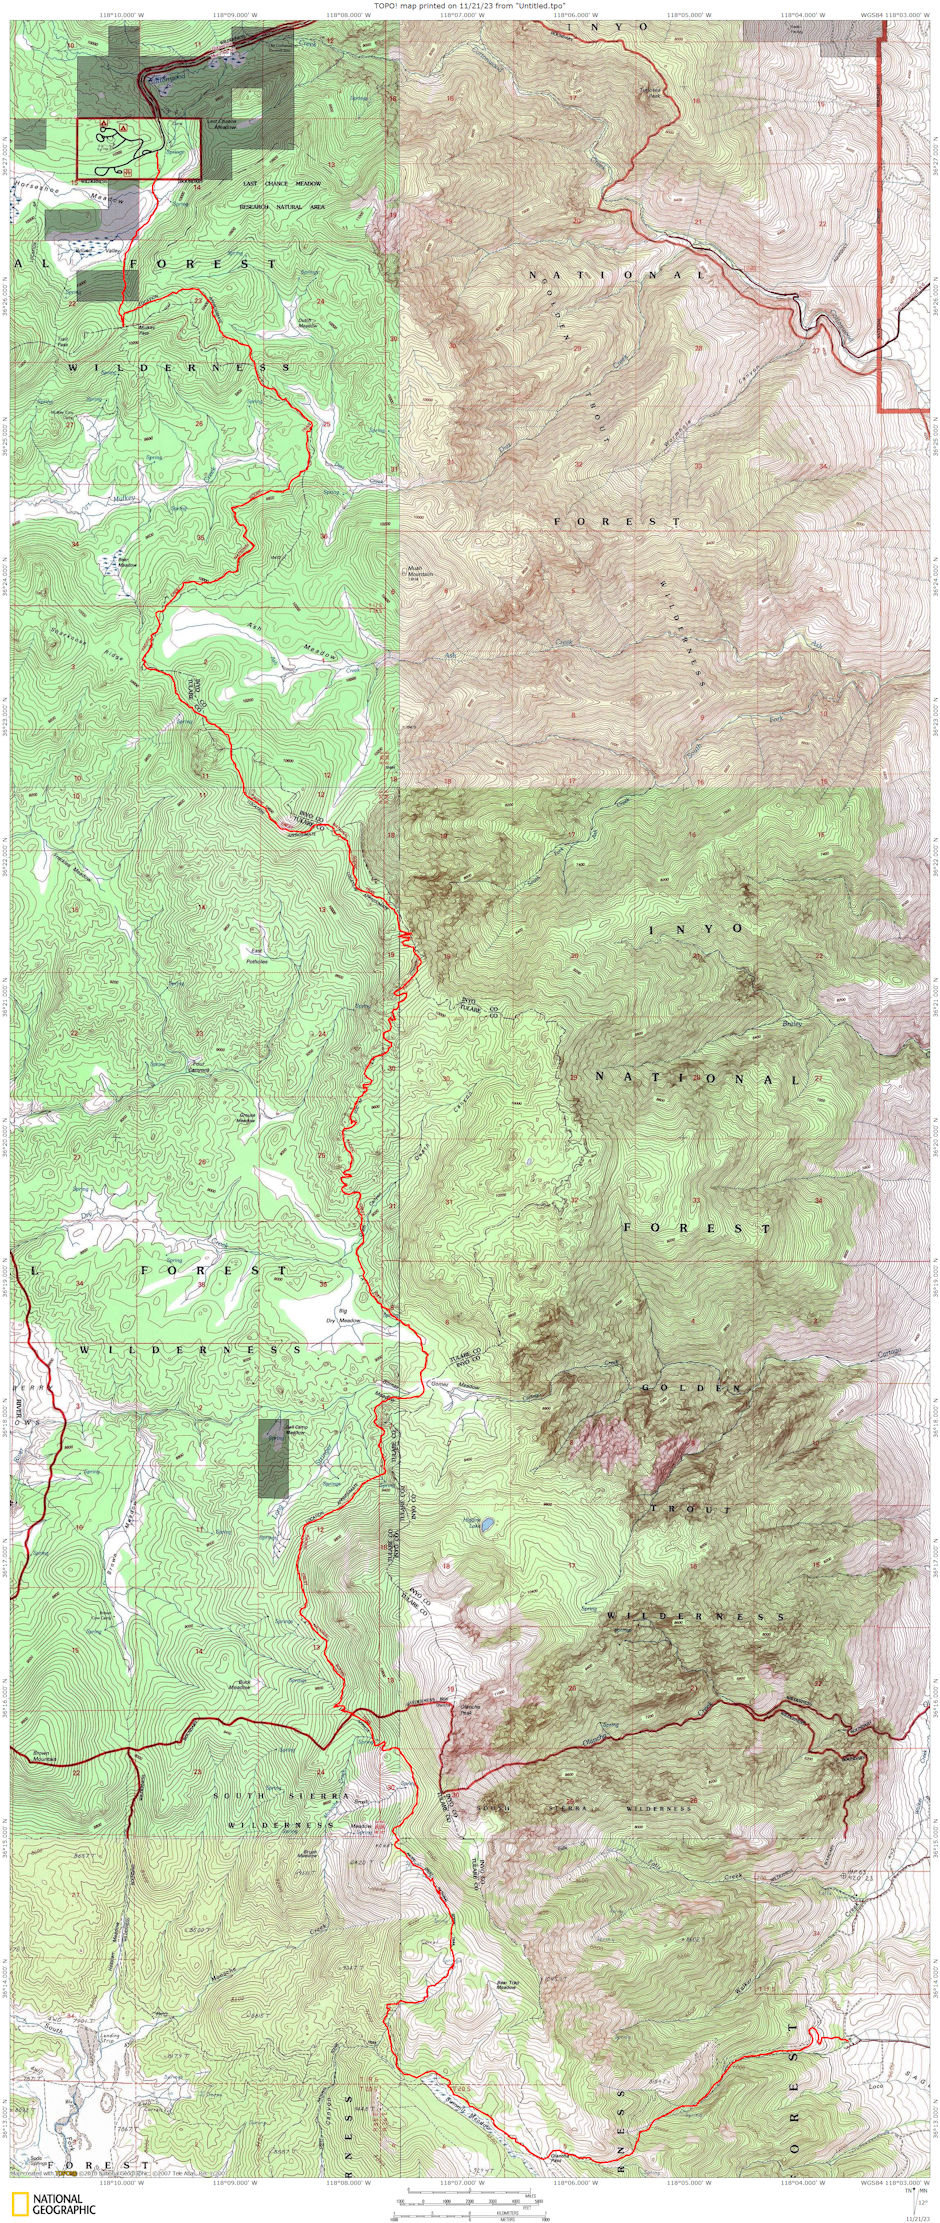 Horseshoe Meadows to Olancha via Pacific Crest Trail route map 1976